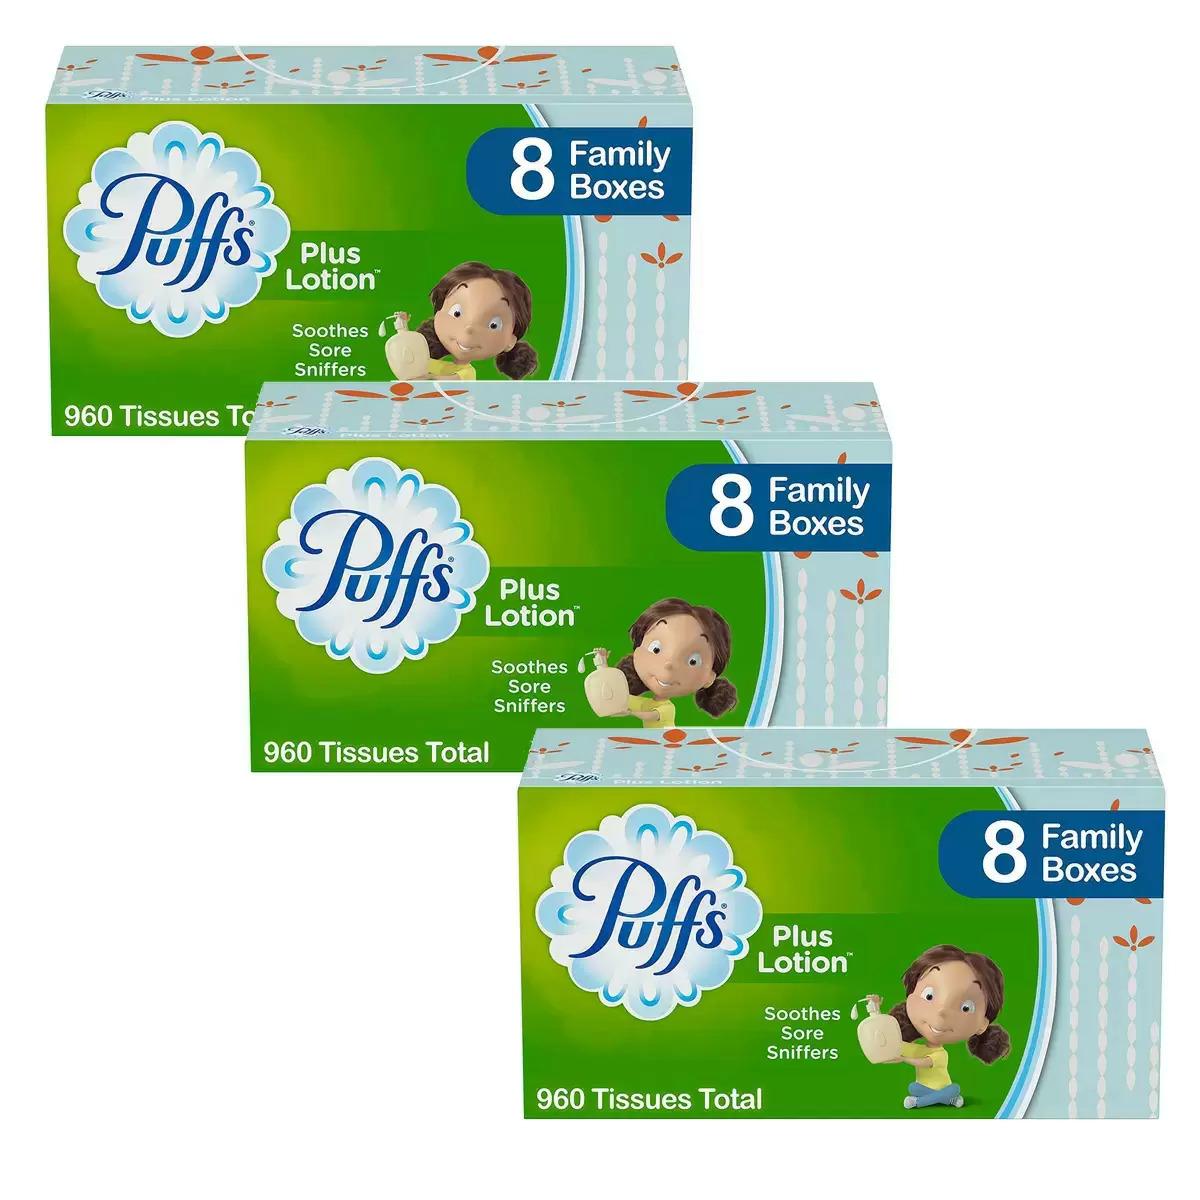 Puffs Plus Lotion Facial Tissues 24 Pack for $28.45 Shipped